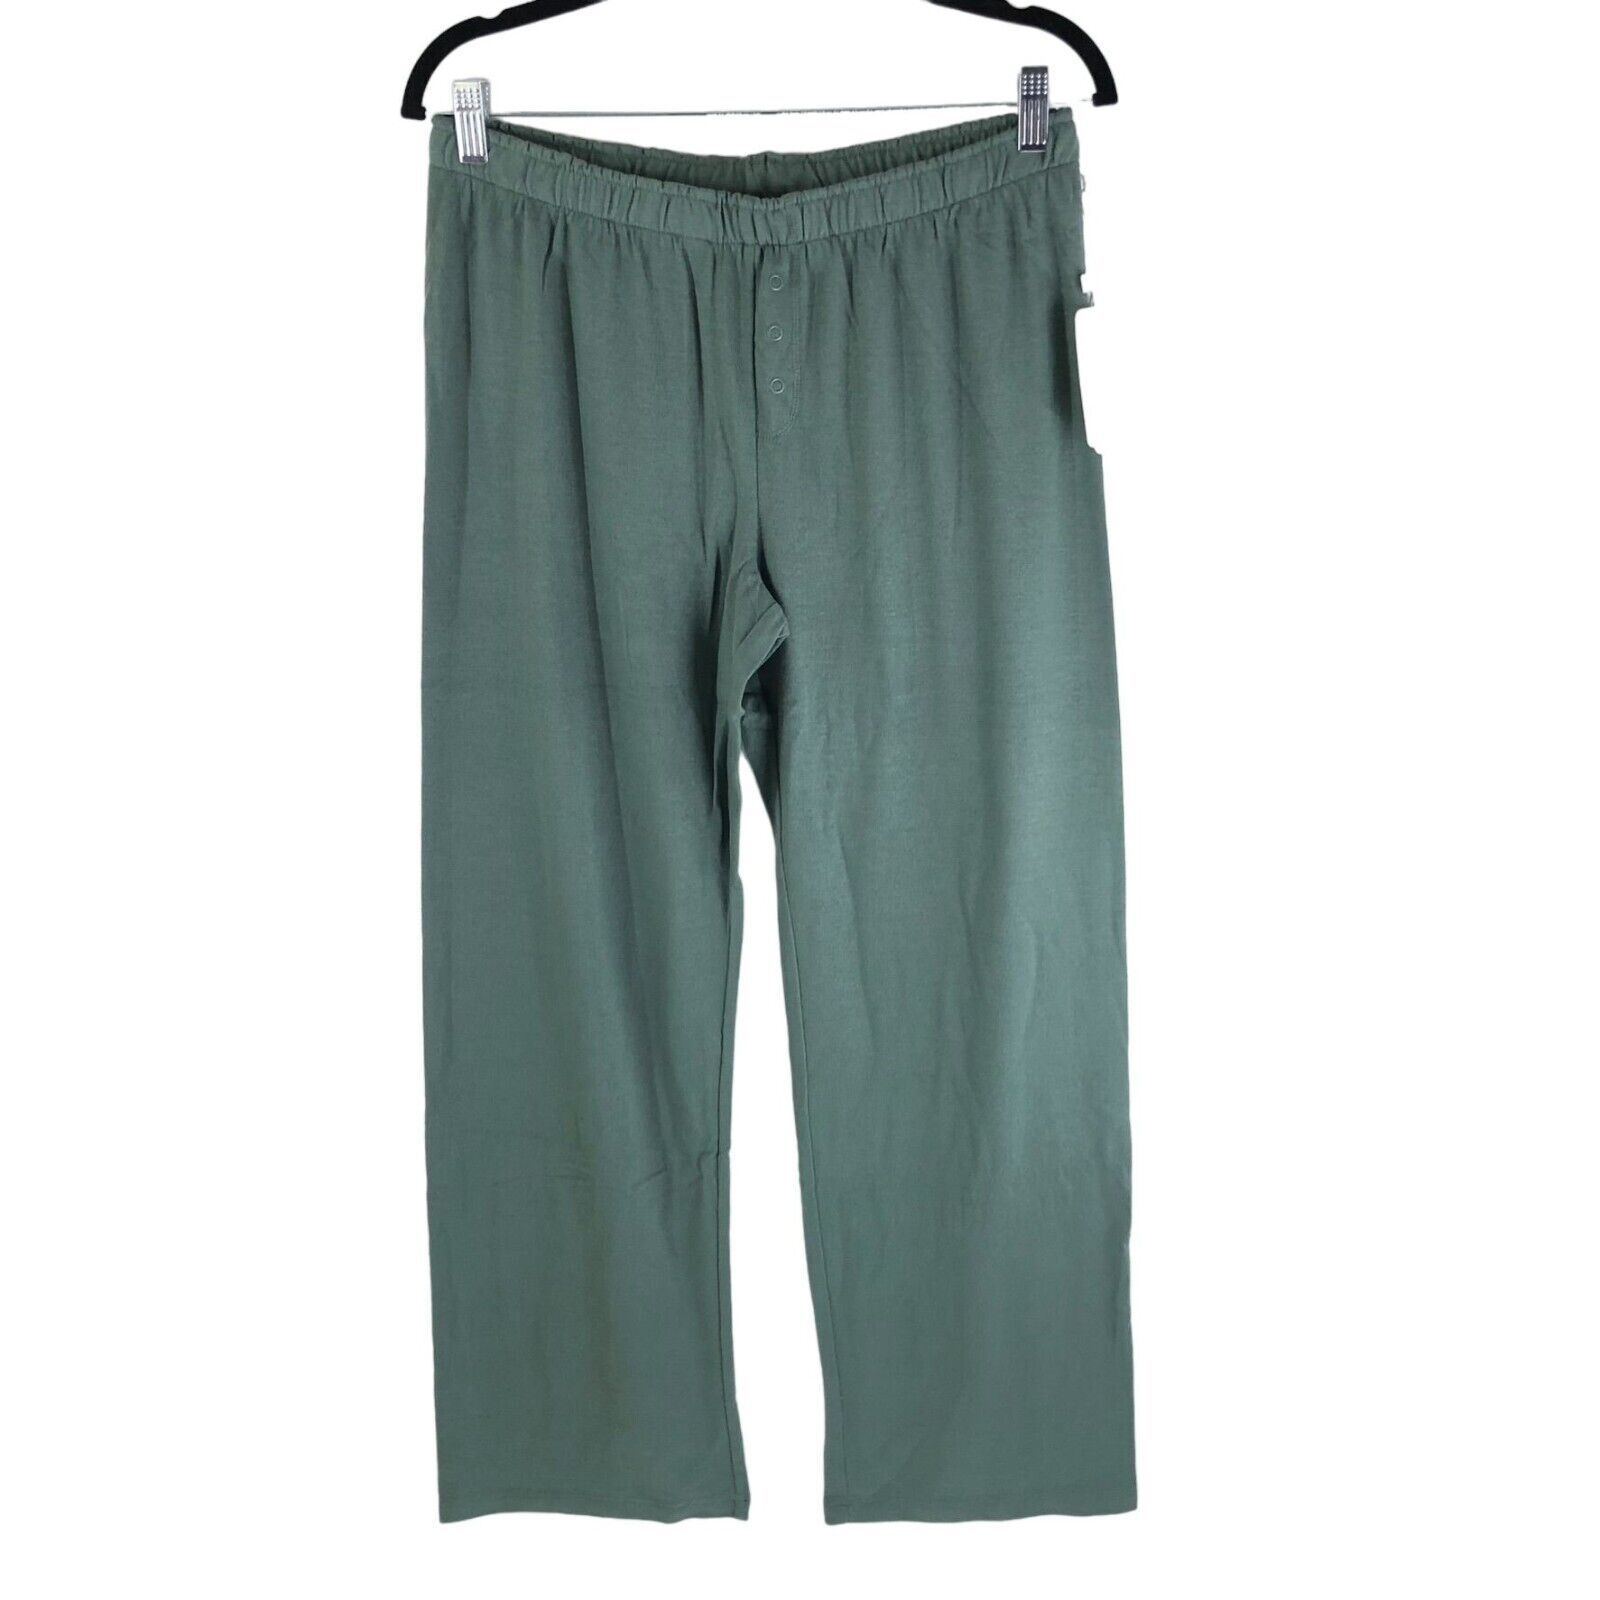 Primary image for PJ Salvage Womens Pajama Lounge Pants Faux Button Fly Green XS